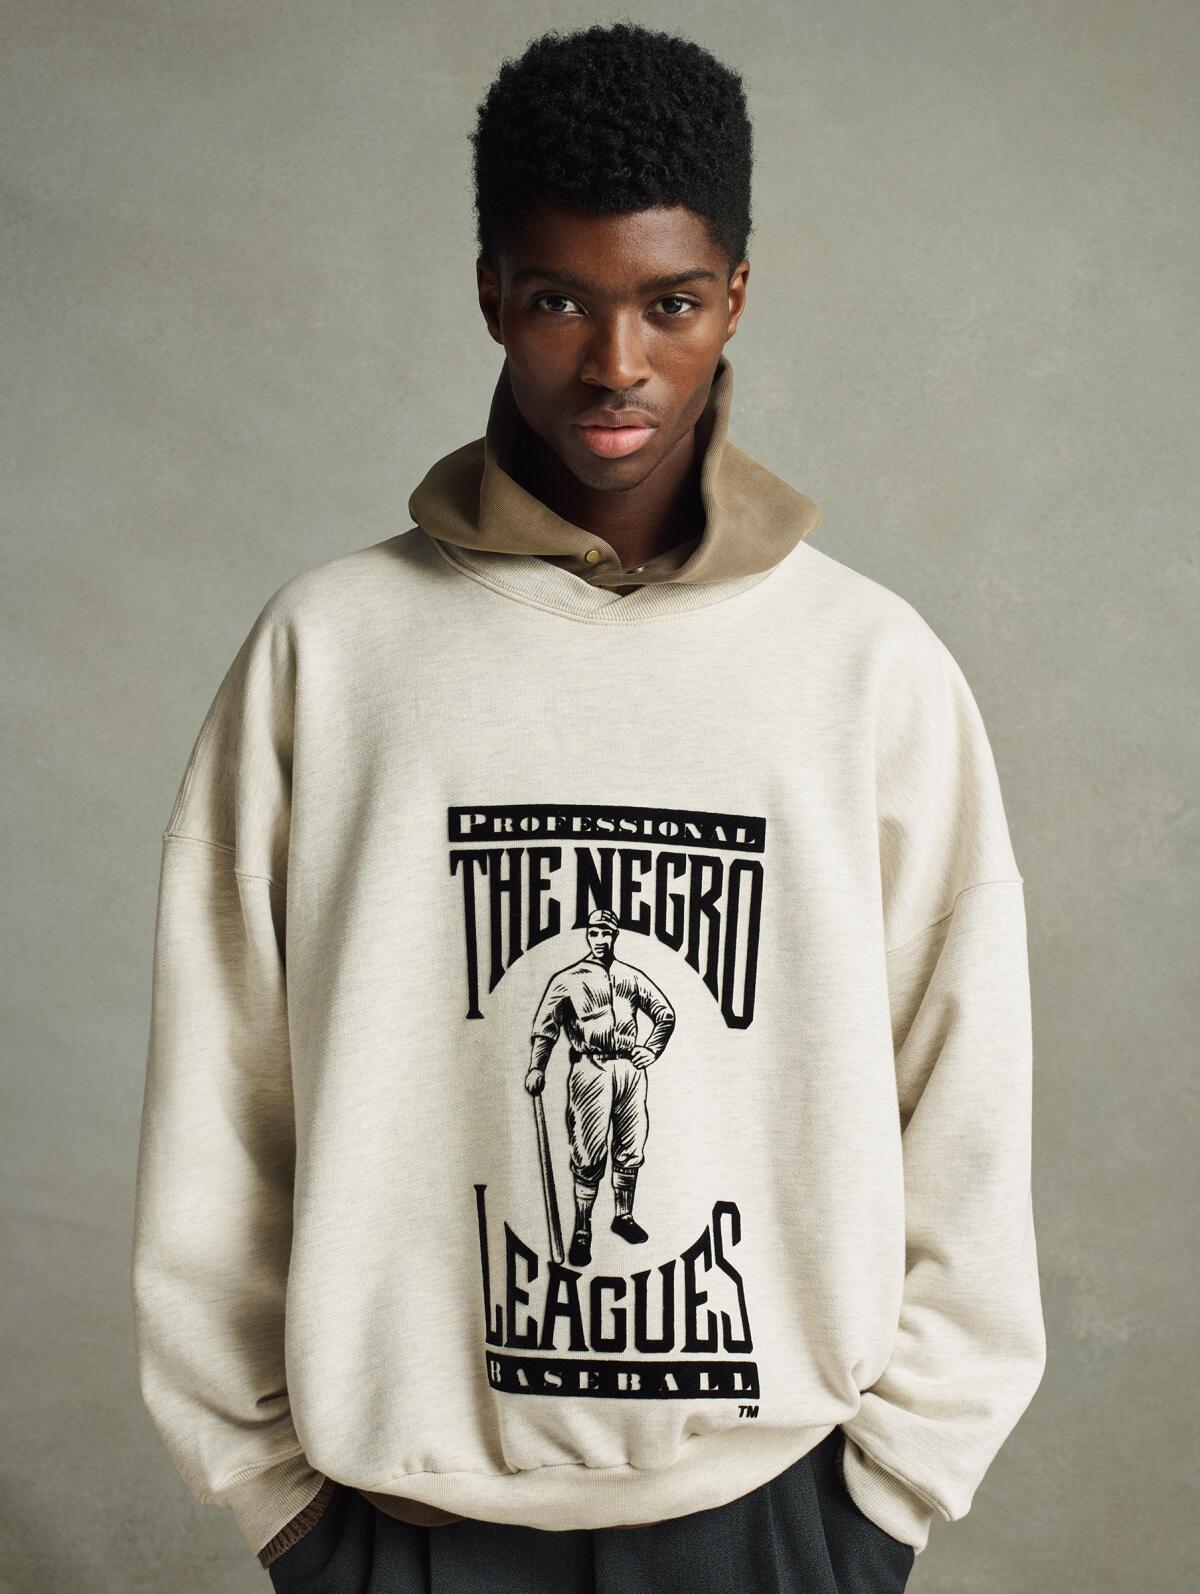 L.A. designer's collection honors baseball's Negro Leagues - Los ...